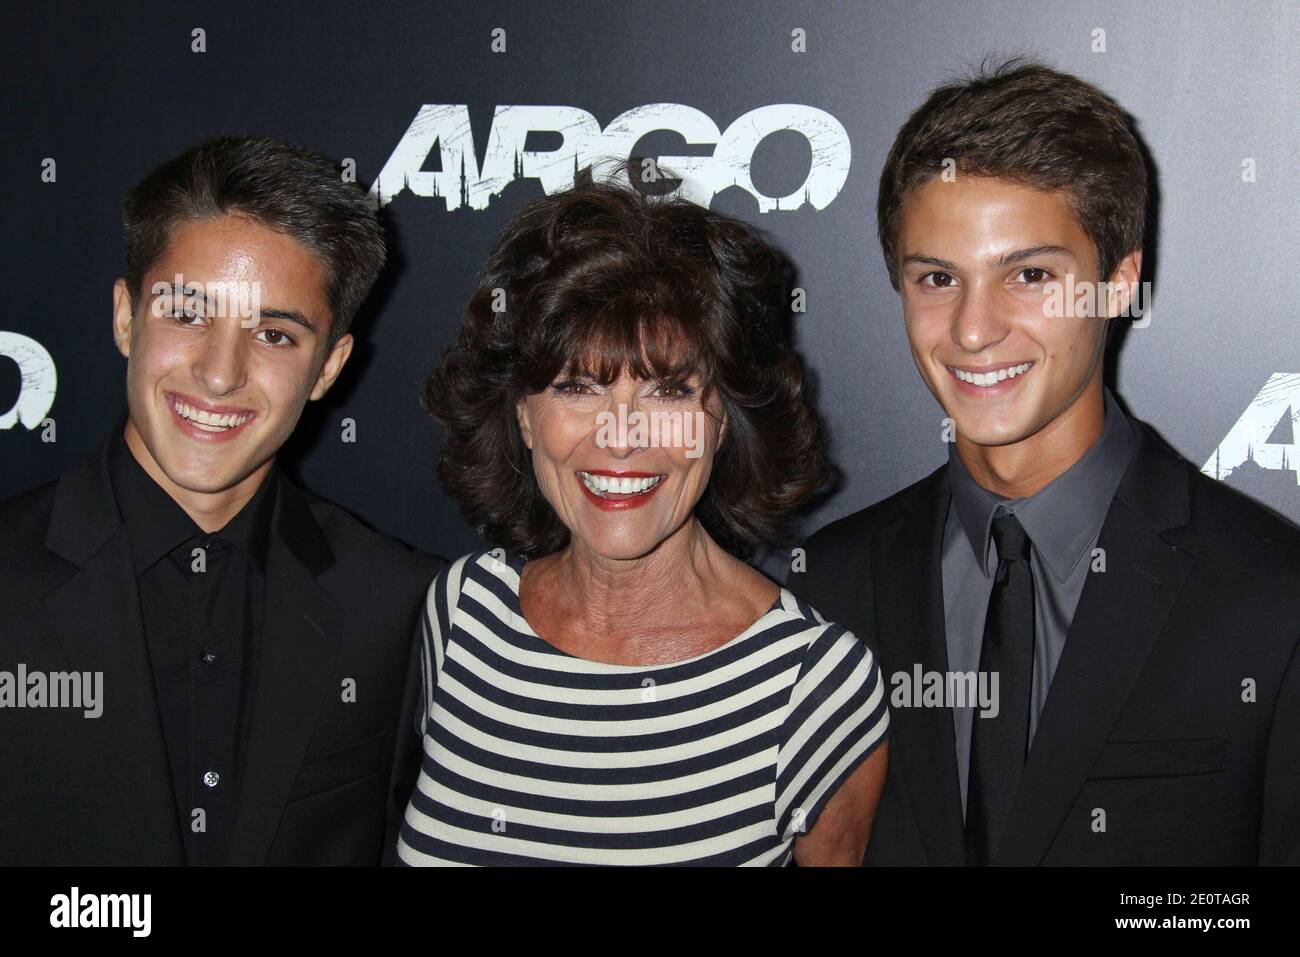 Adrienne Barbeau, Warner Bros. Pictures premiere for ARGO at the AMPAS Samuel Goldwyn Theater in Beverly Hills, Ca, USA, October 4, 2012. (Pictured: Adrienne Barbeau). Photo by Baxter/ABACAPRESS.COM Stock Photo